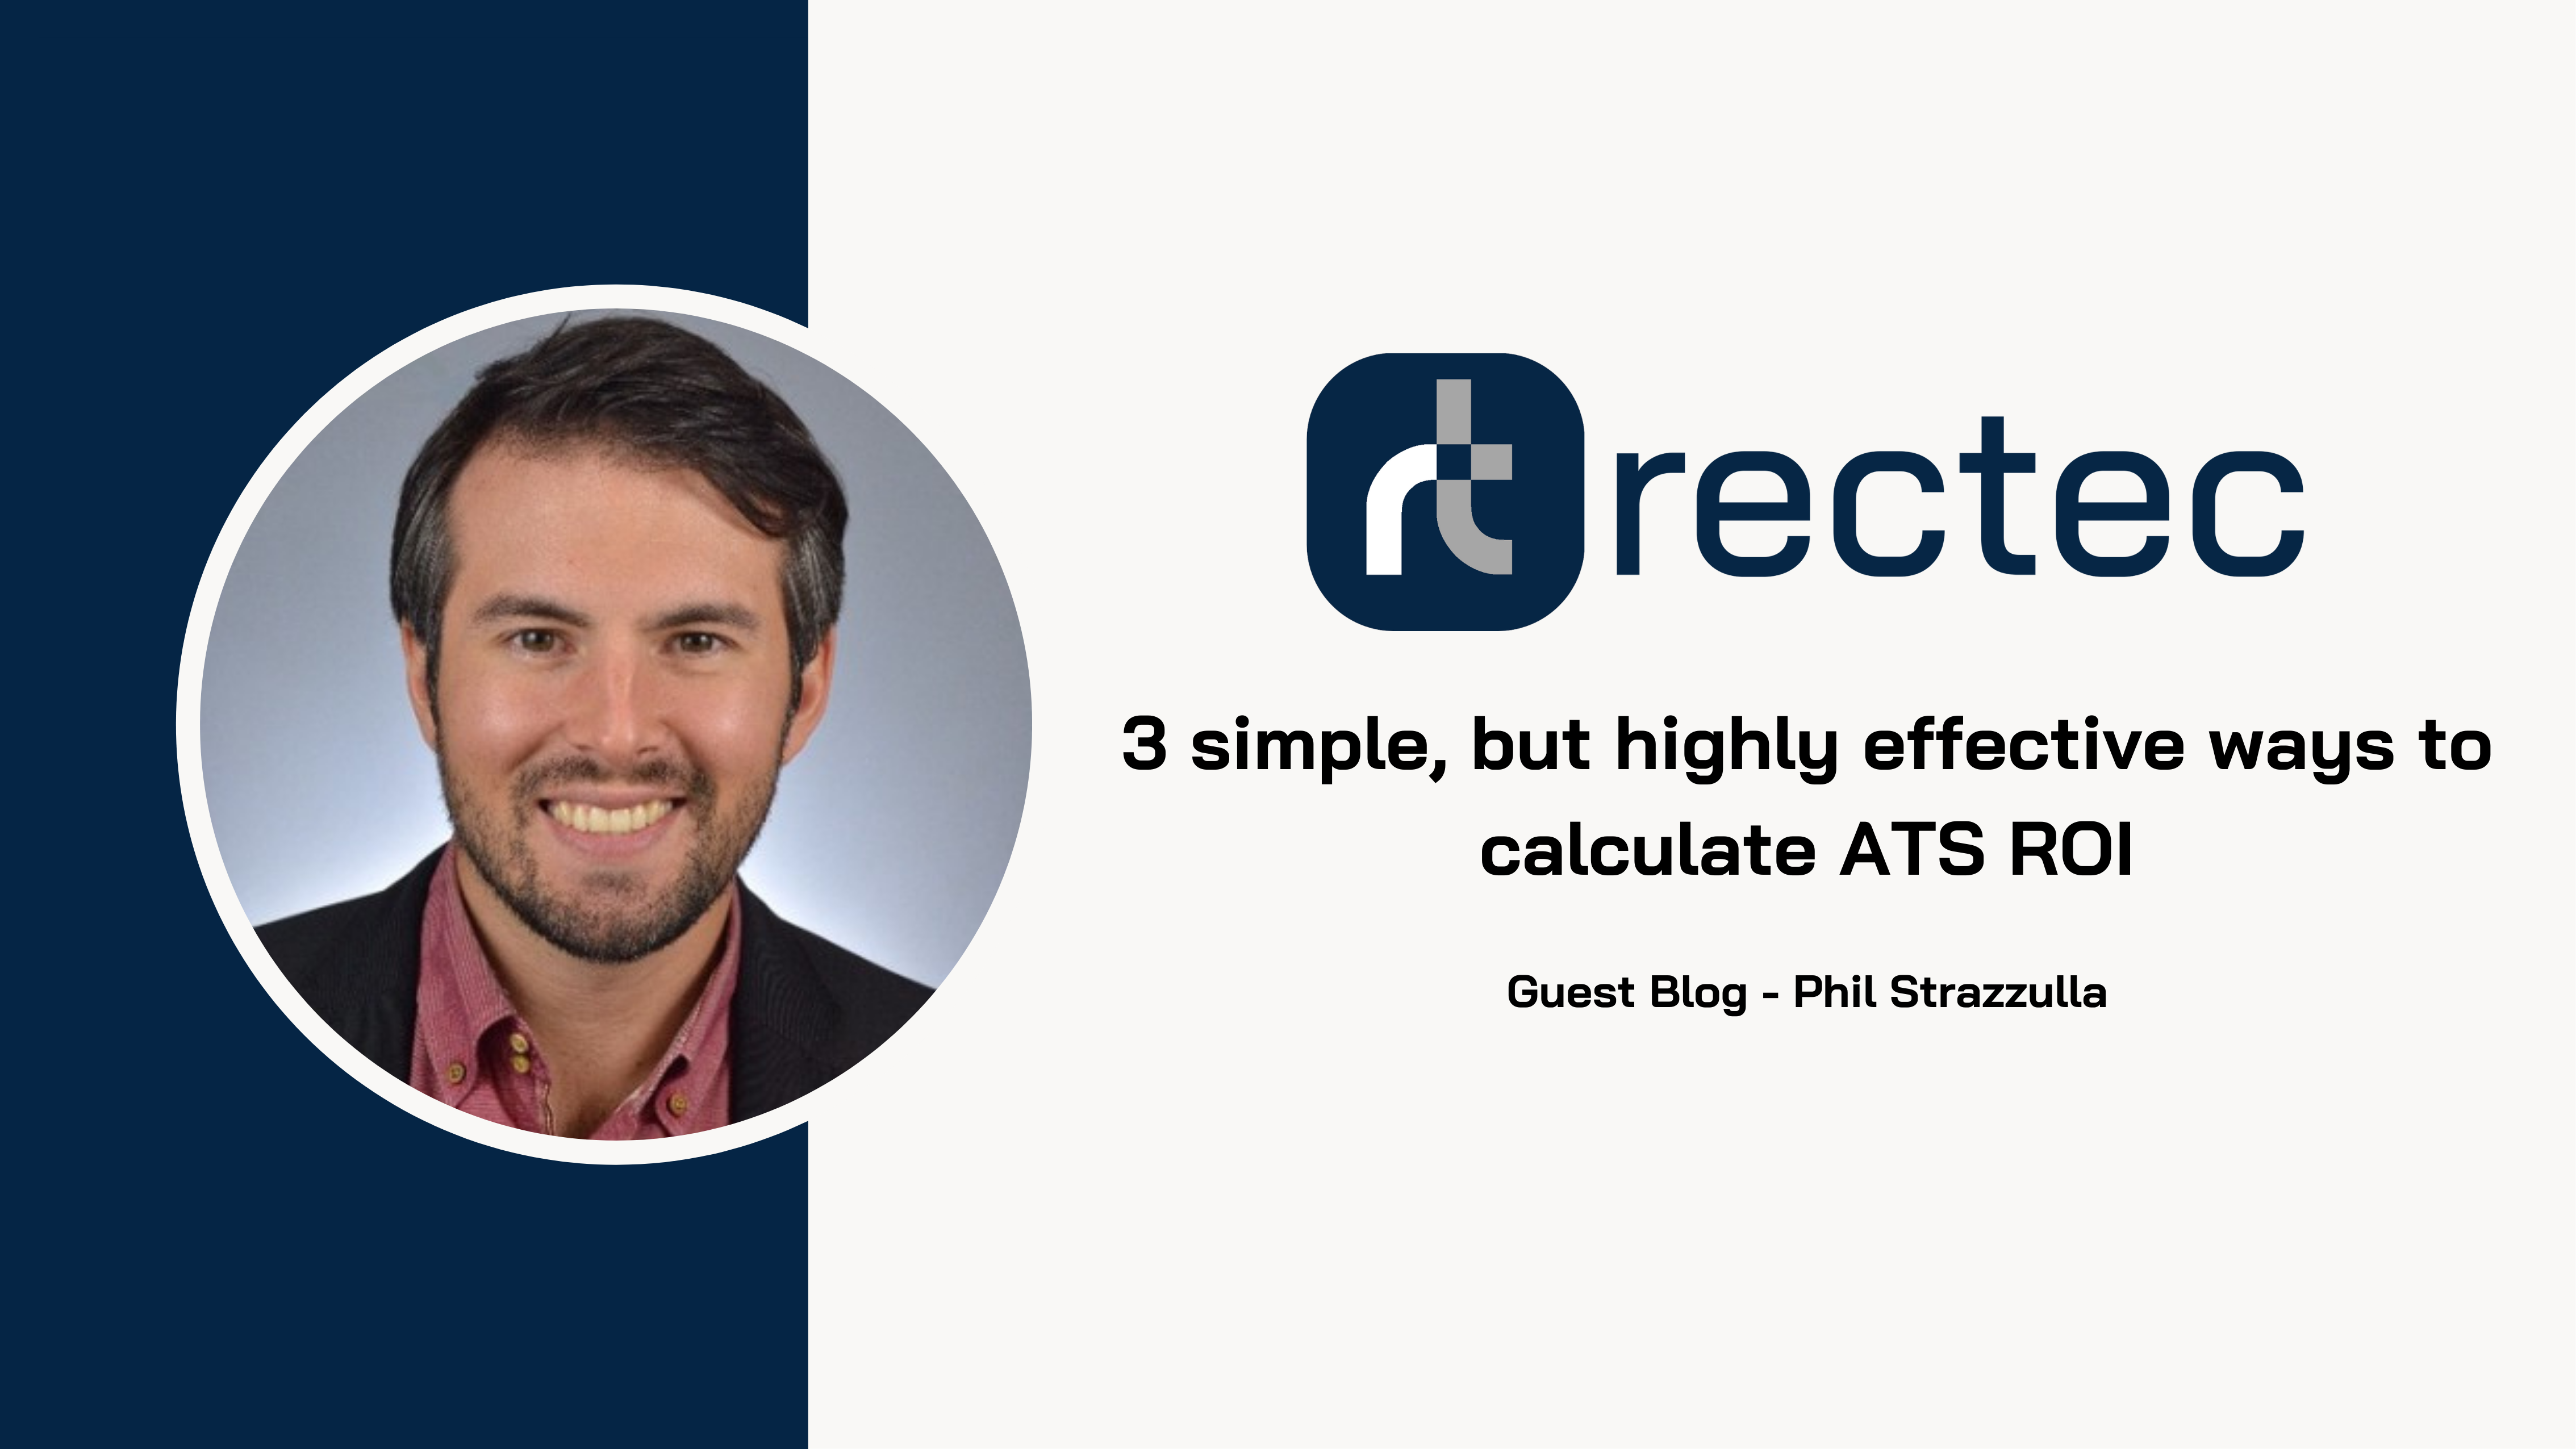 3 simple, but highly effective ways to calculate ATS ROI